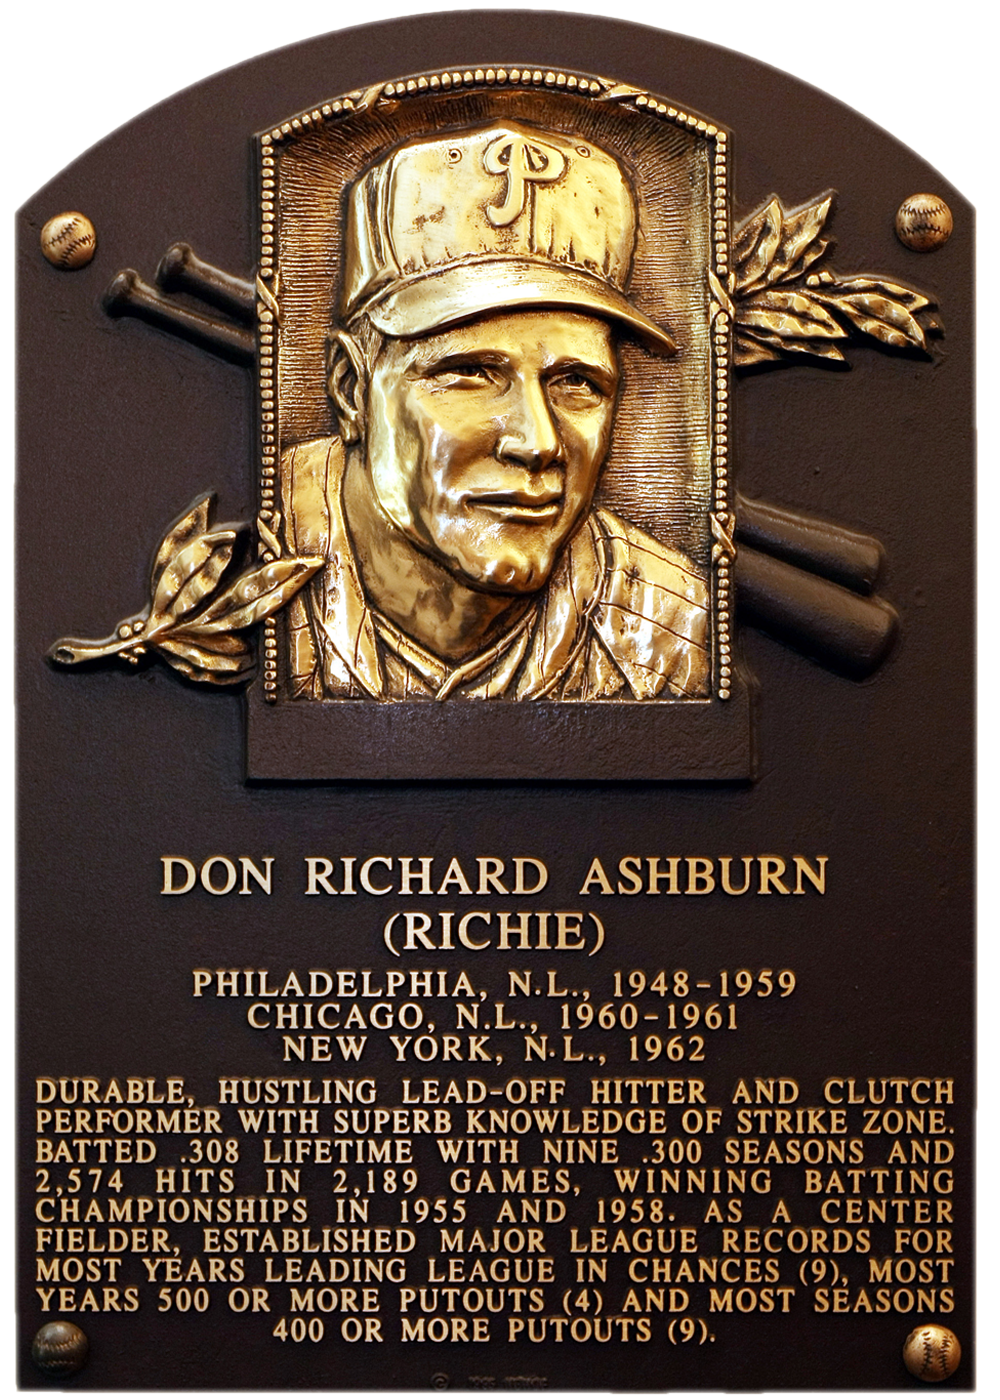 Richie Ashburn Hall of Fame plaque